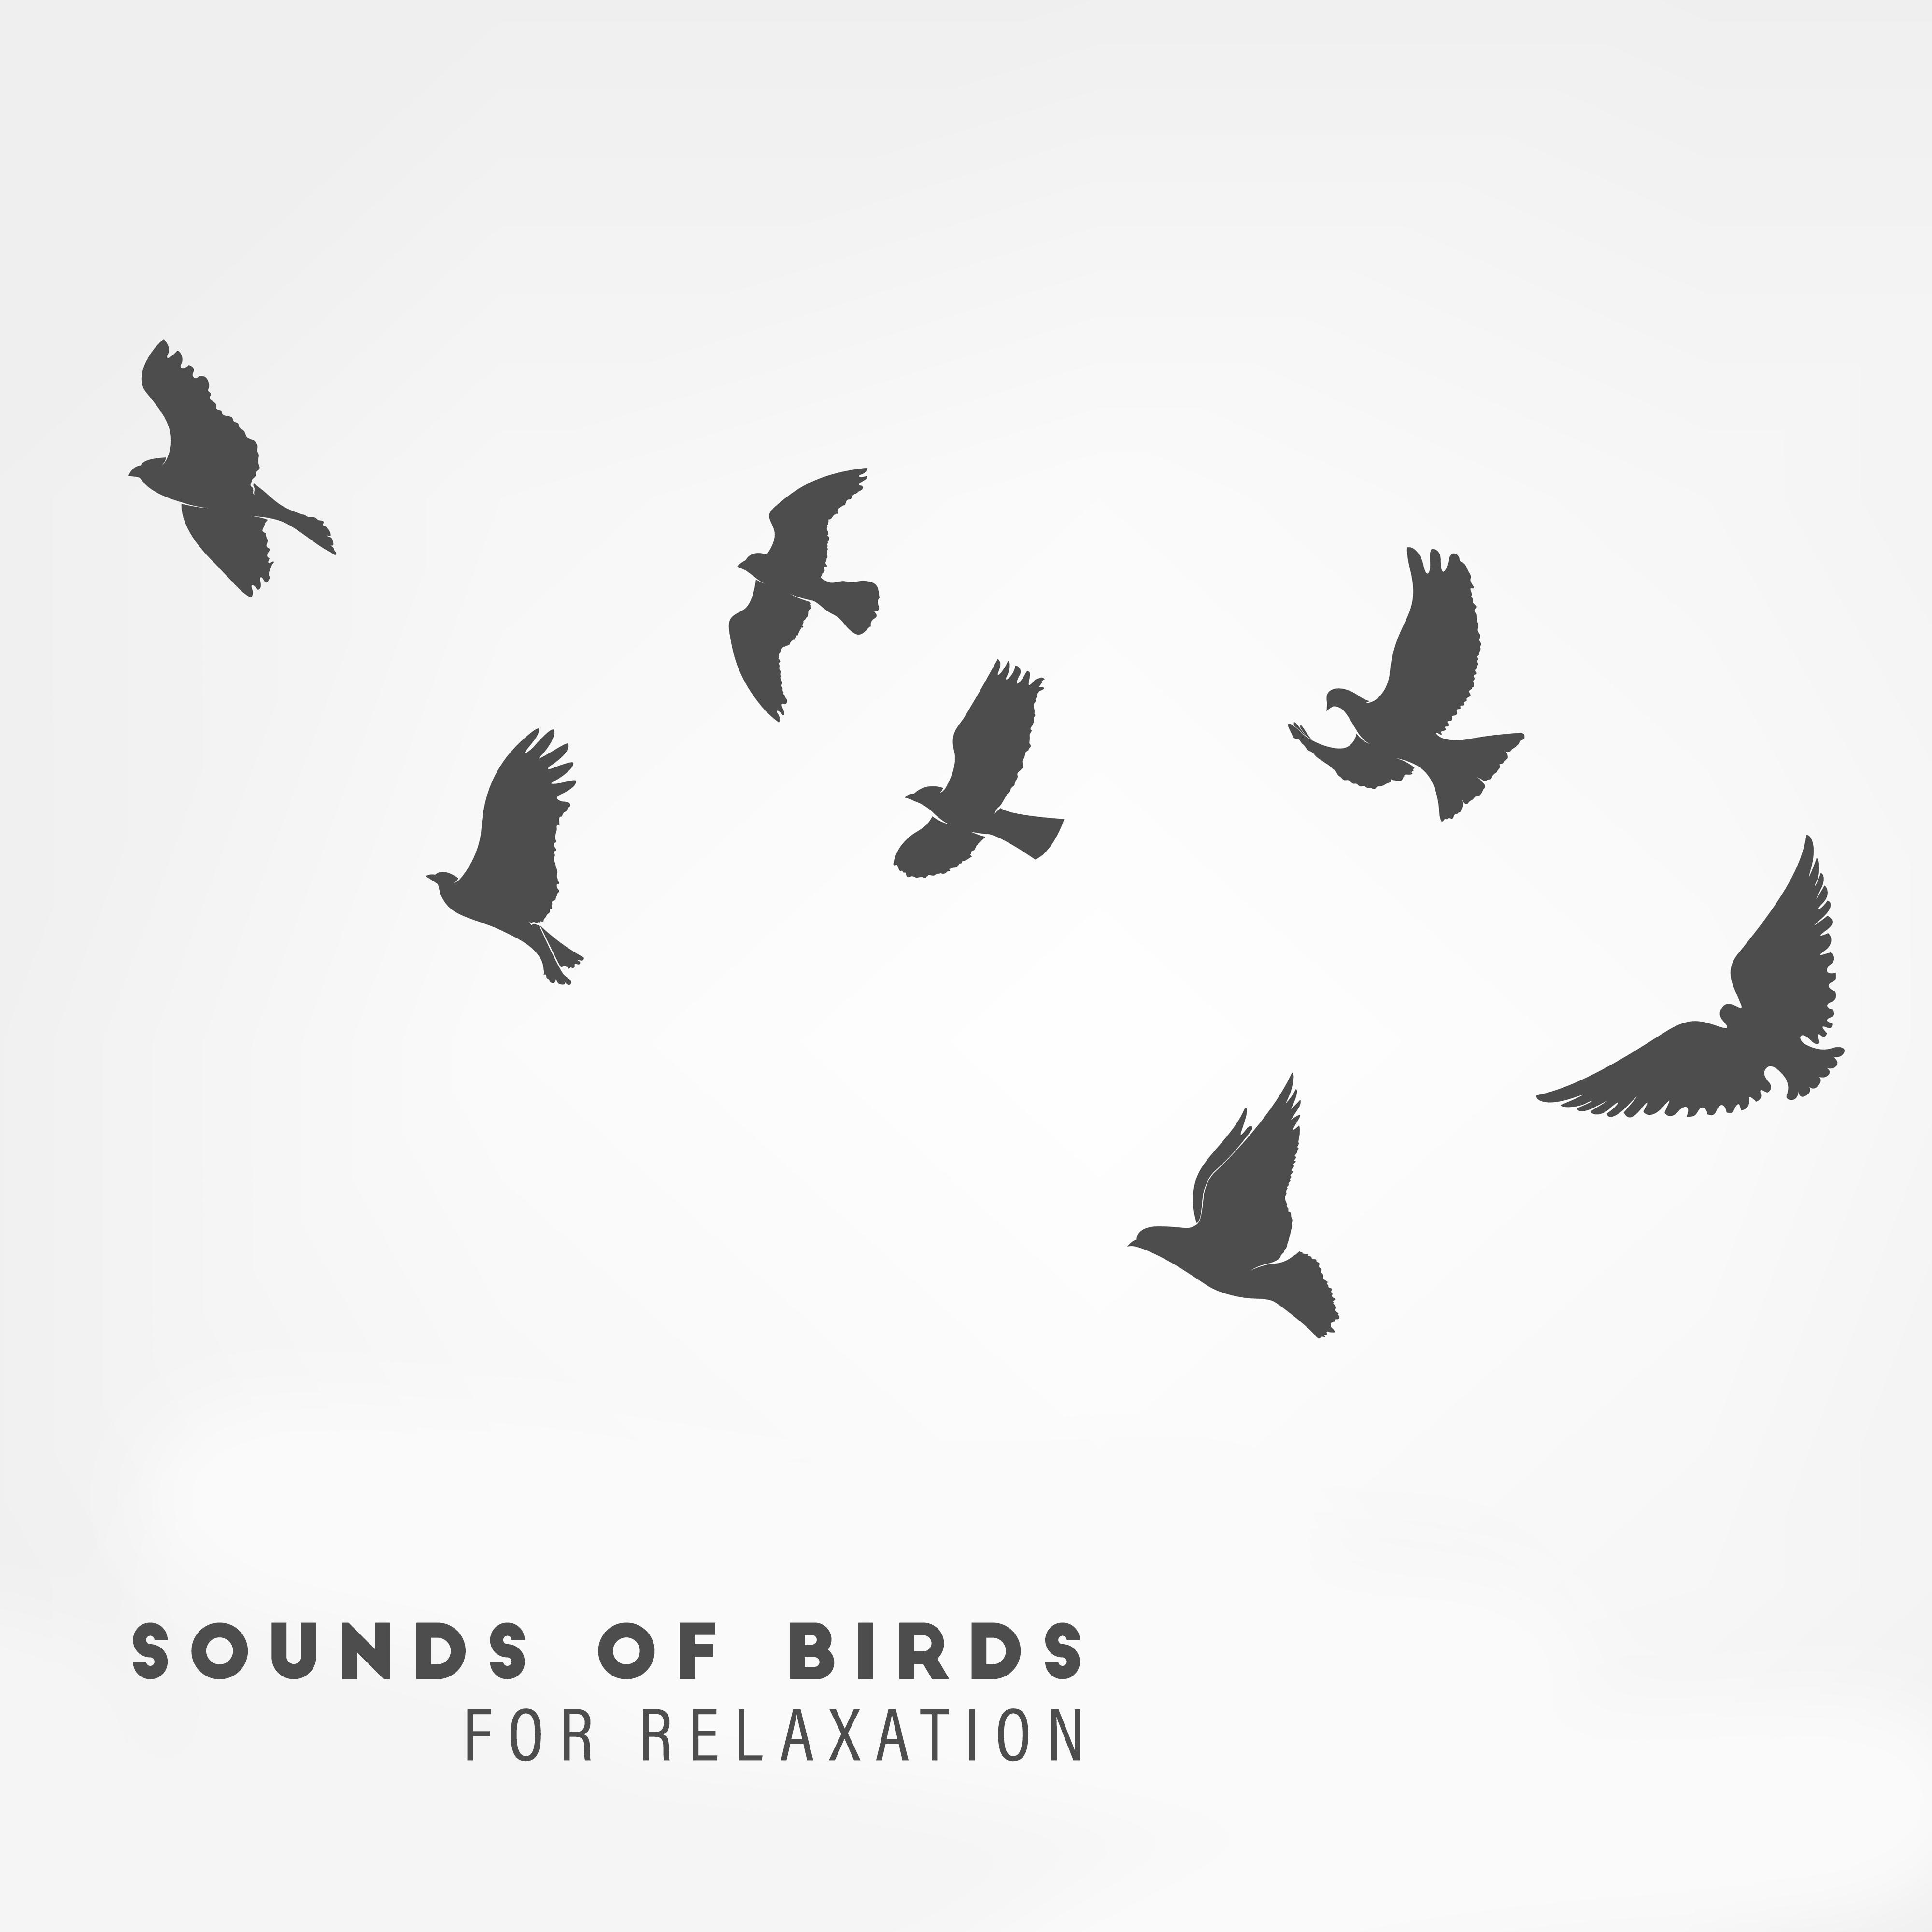 Sounds of Birds for Relaxation – Zen Lounge, Nature Sounds to Calm Down, Reduce Stress, Healing Music for Rest, Sleep, Meditation Music Zone